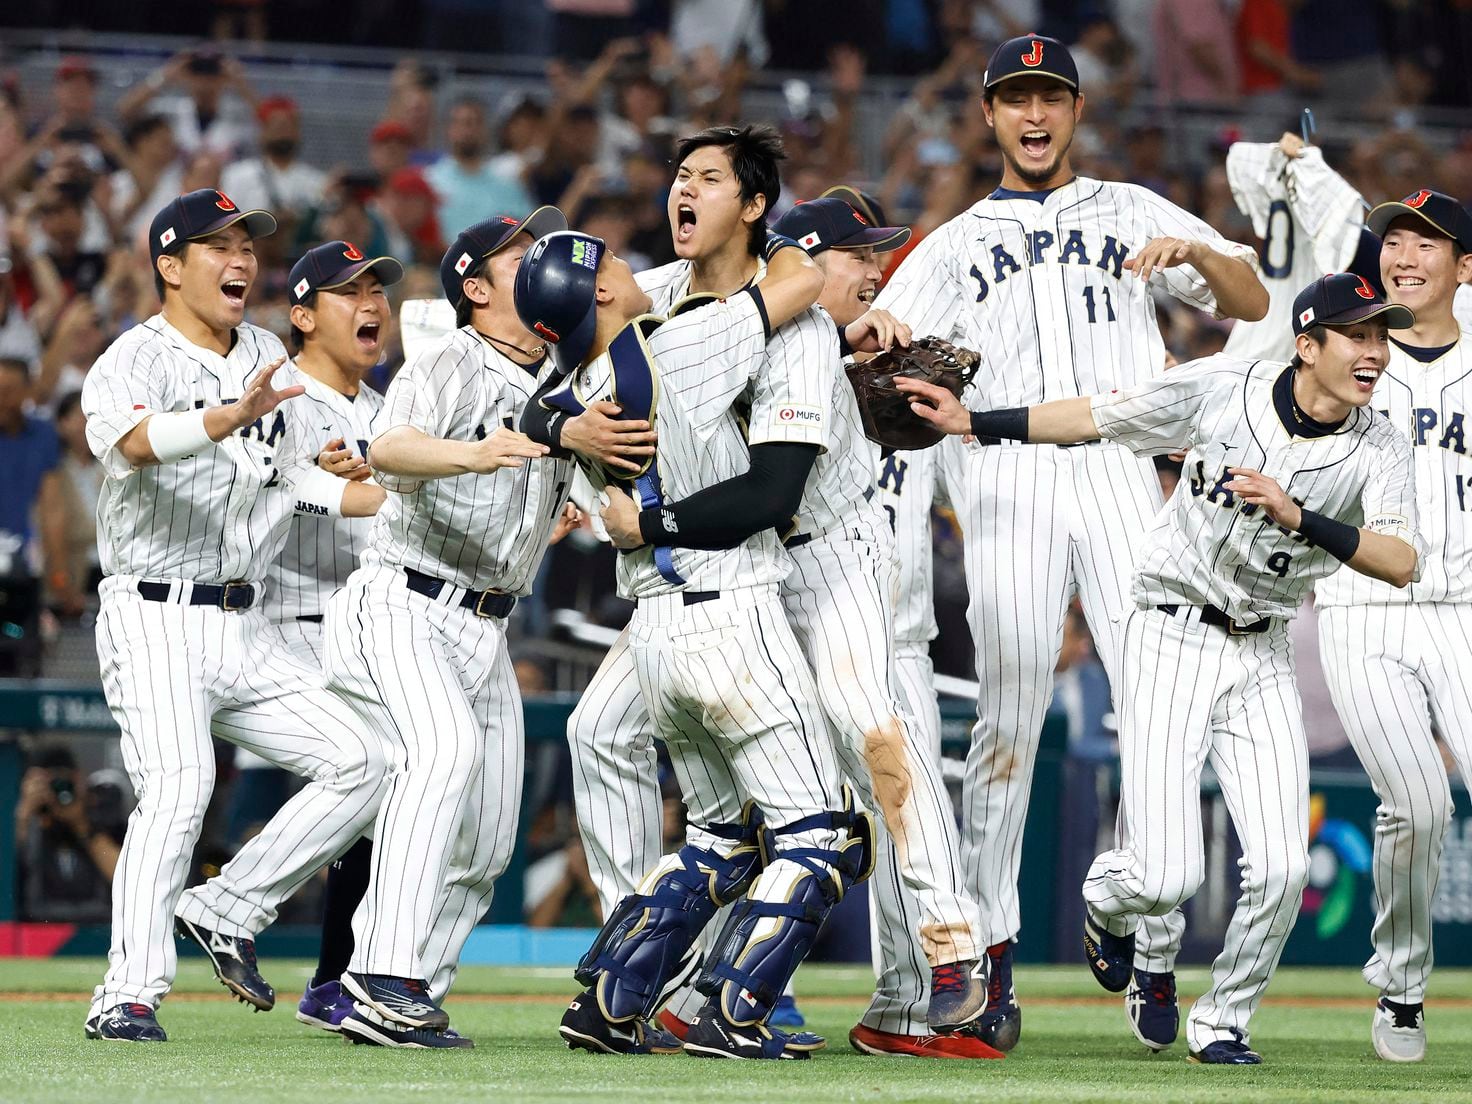 Led by Ohtani, Japan has the talent to win World Baseball Classic Pool B